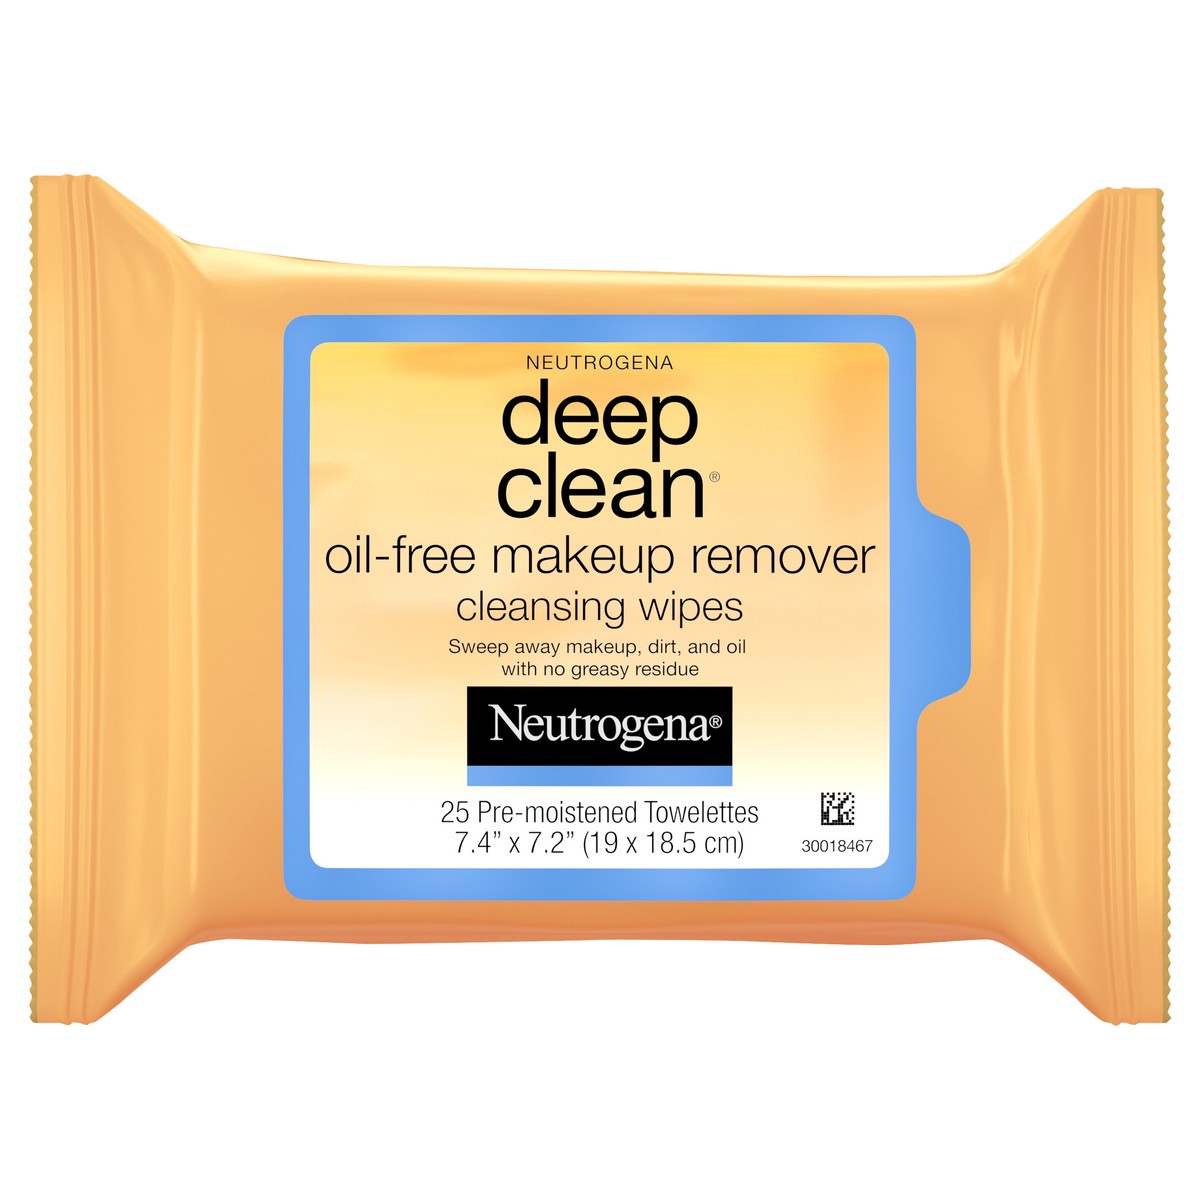 slide 5 of 9, Neutrogena Deep Clean Oil-Free Makeup Remover Cleansing Face Wipes, Daily Cleansing Towelettes to Remove Dirt, Oil, and Makeup, 25 ct, 25 ct